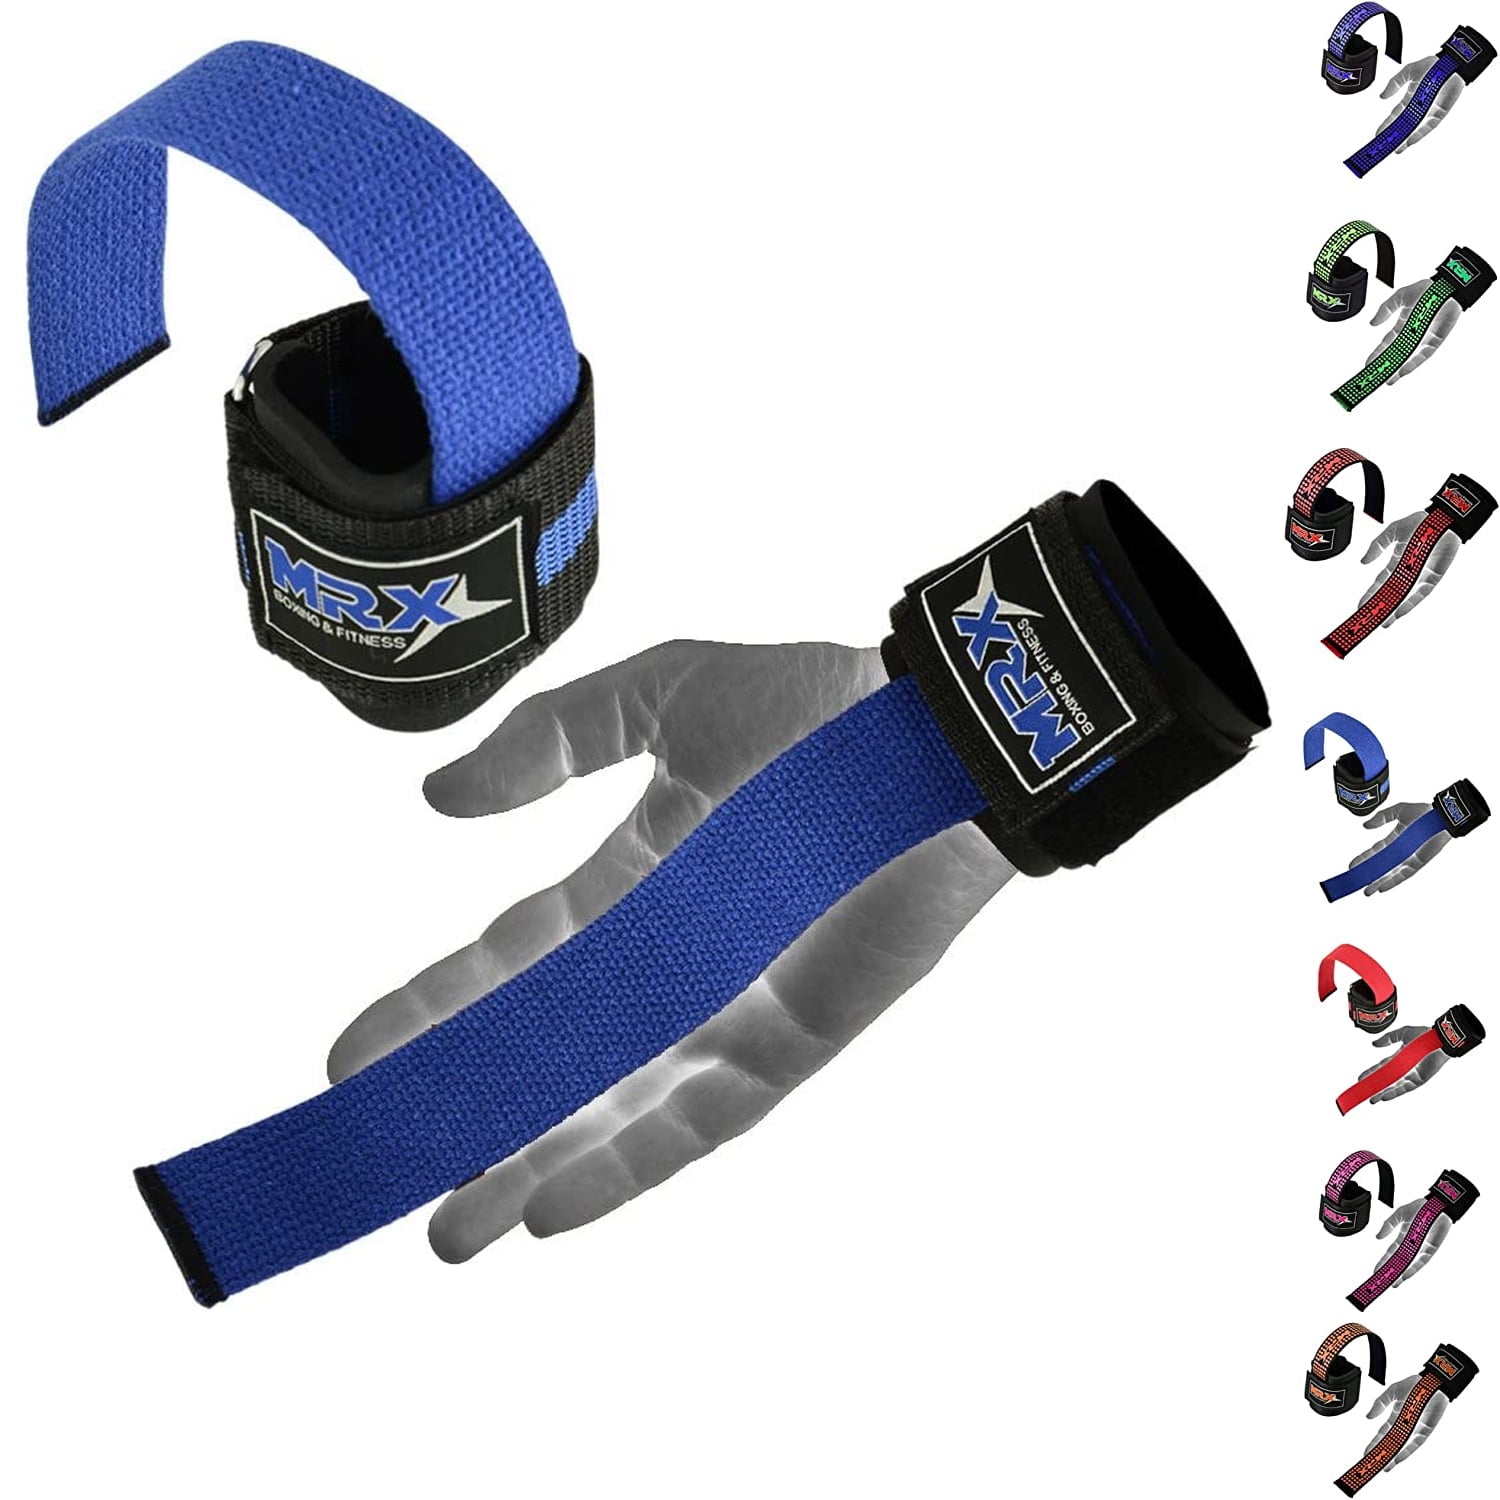 Buy HiRui 2 Pack Wrist Compression Strap and Wrist Brace Sport Wrist Support  for Fitness, Weightlifting, Tendonitis, Pain Relief.etc - Wear Anywhere -  Unisex, Adjustable Online at Low Prices in India 